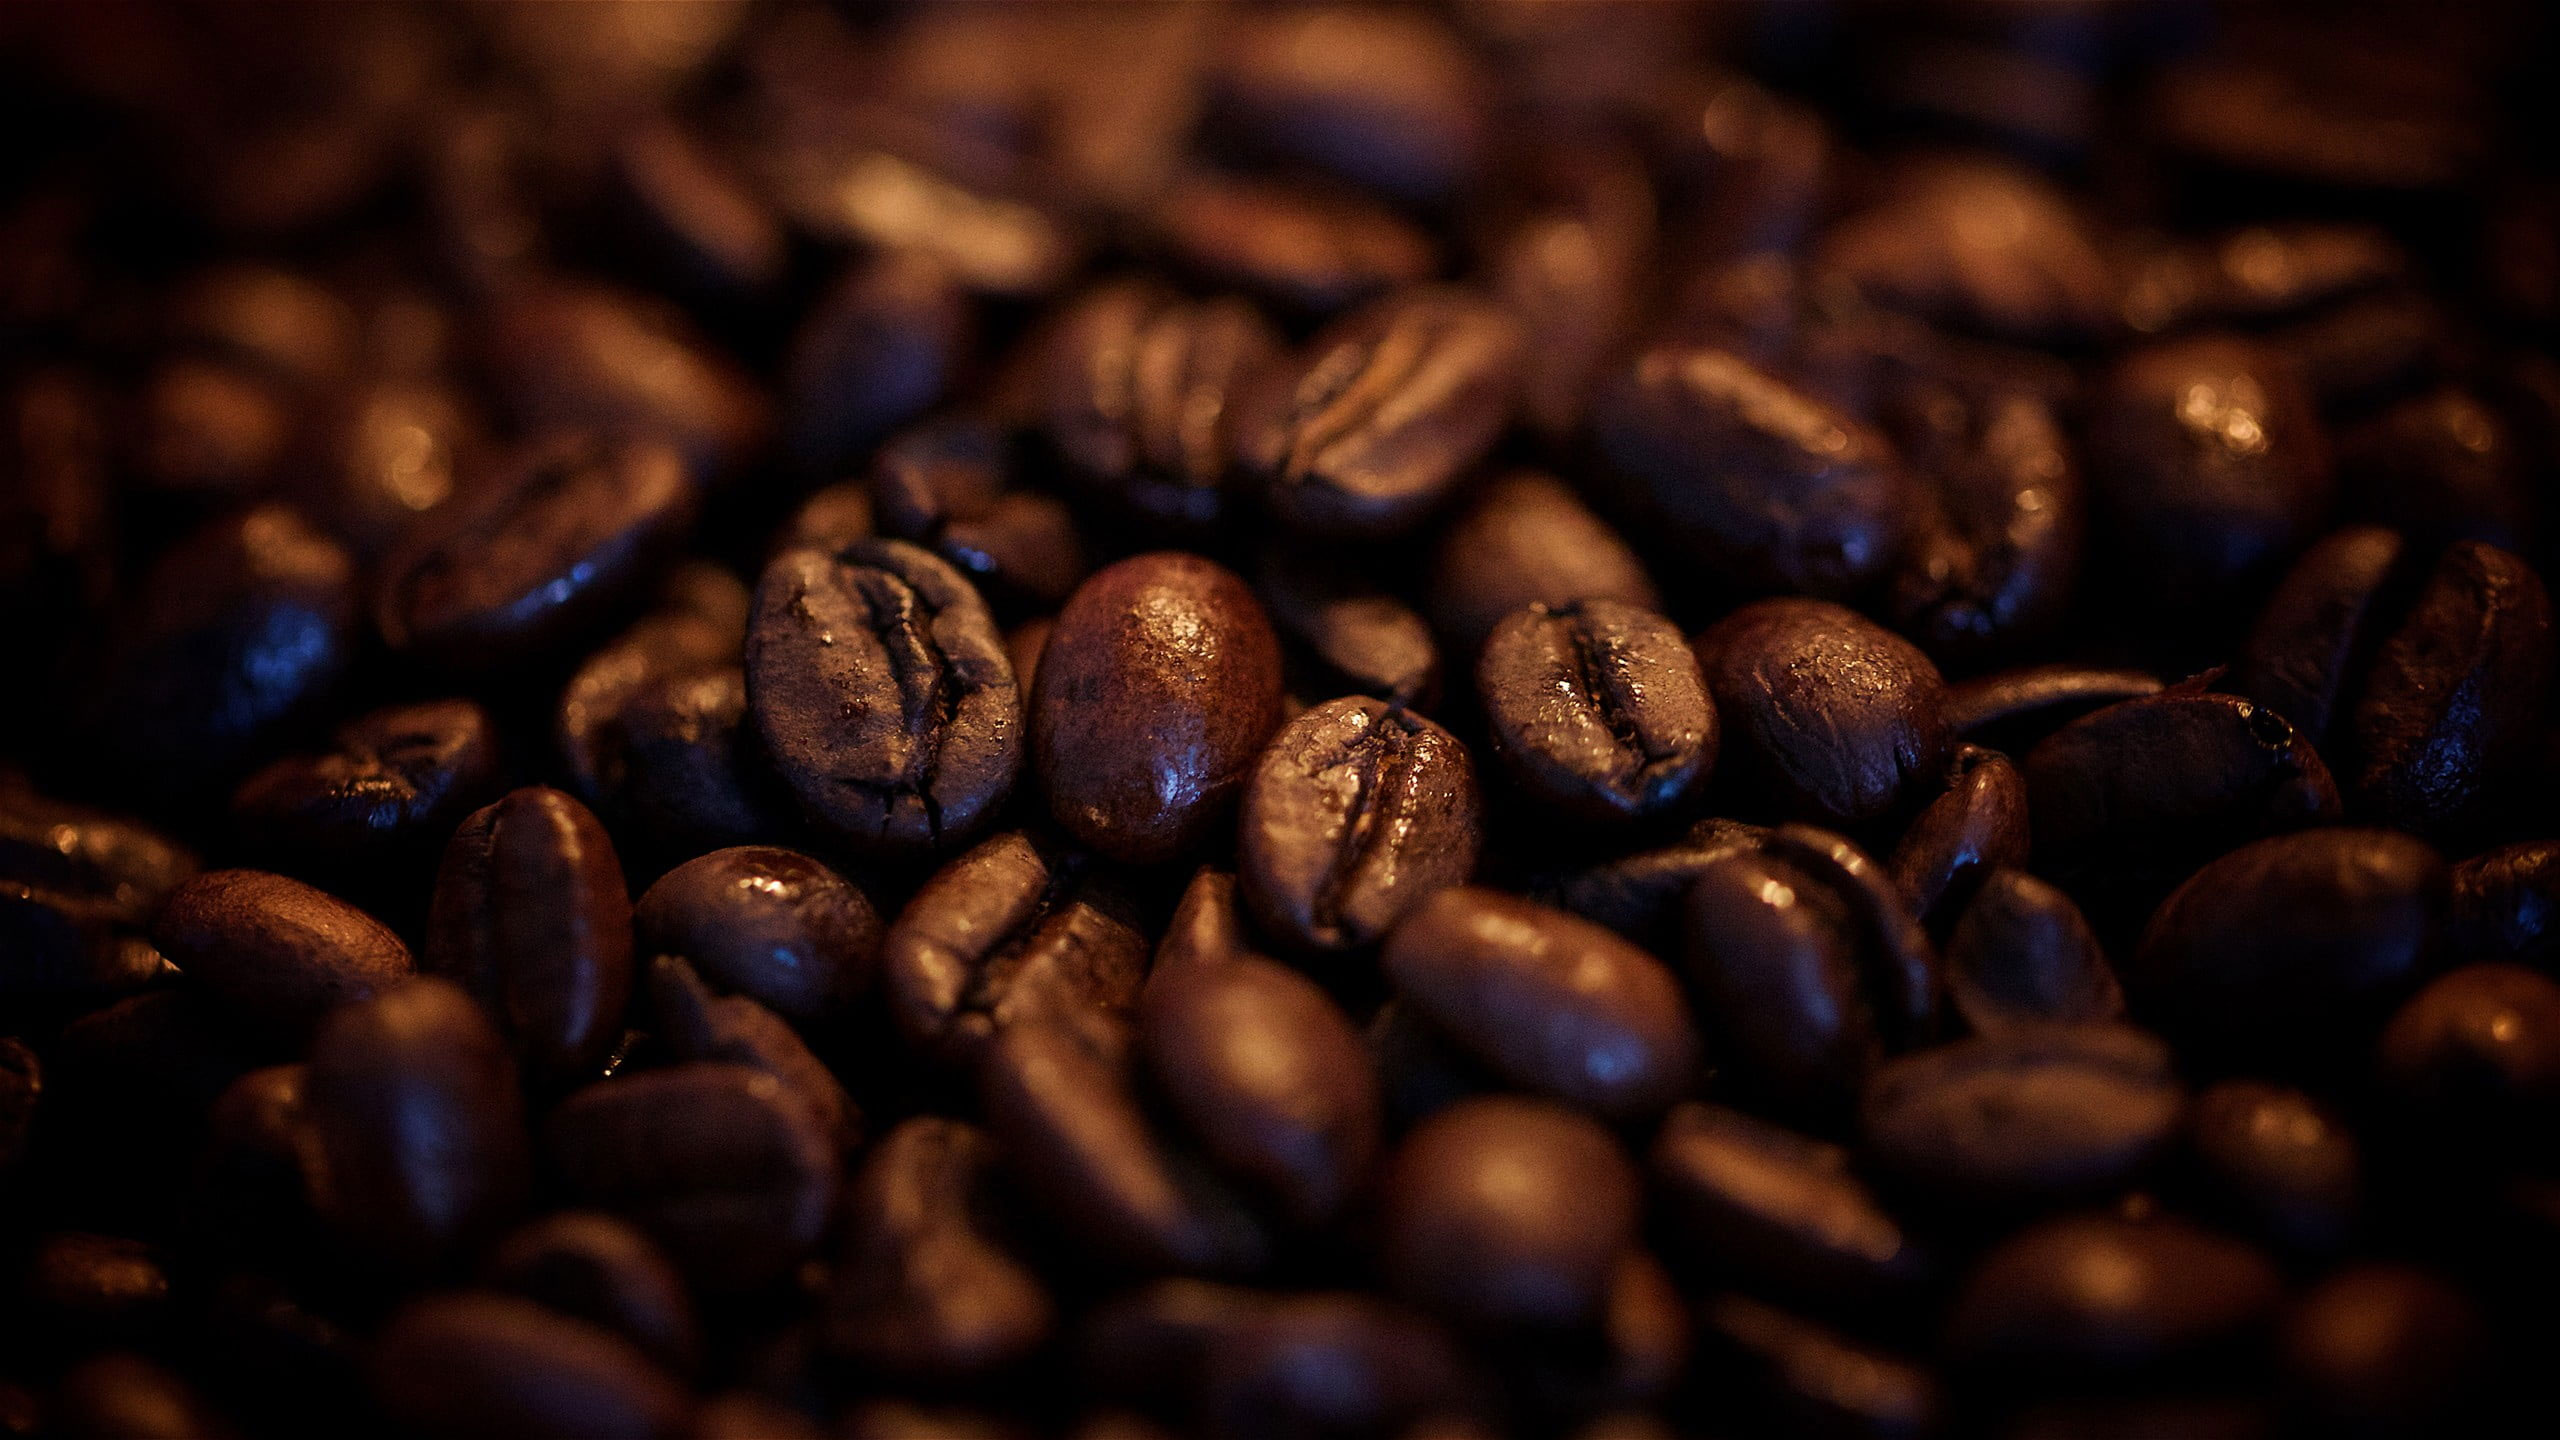 Coffee beans wallpaper, food and drink, roasted coffee bean, coffee – drink